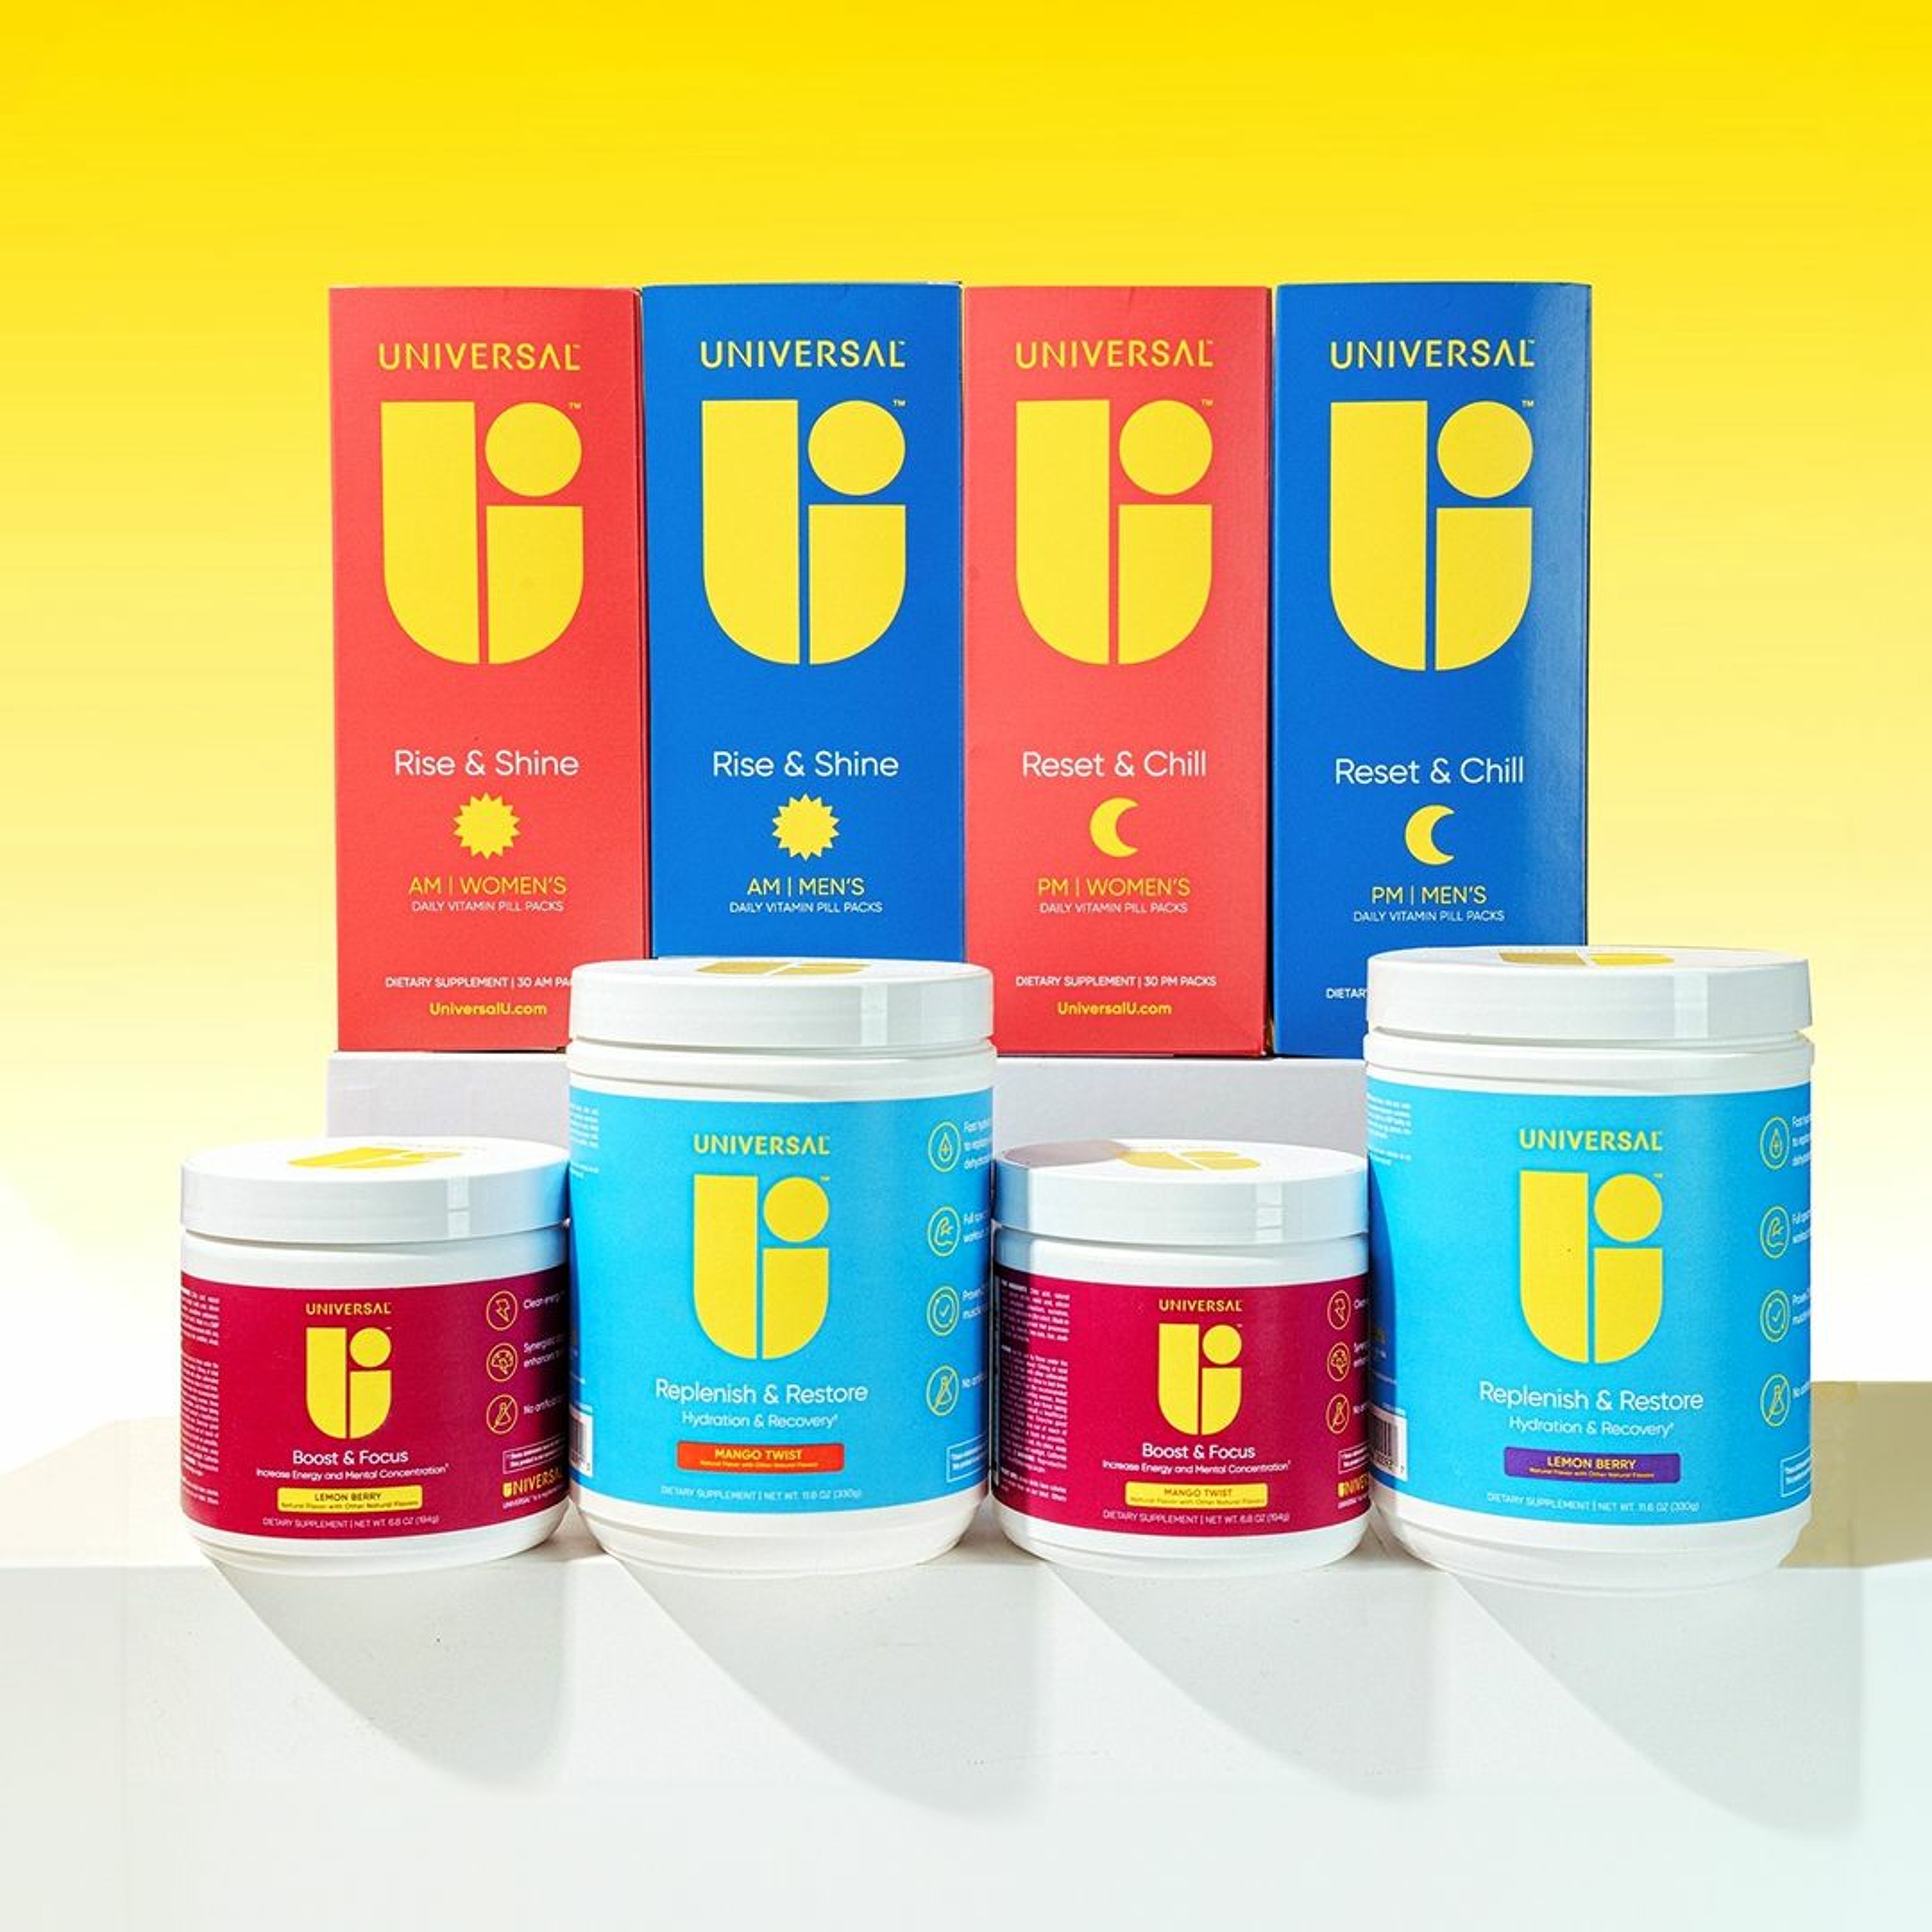 Universal brand relaunches with its active nutrition approach in four supplements